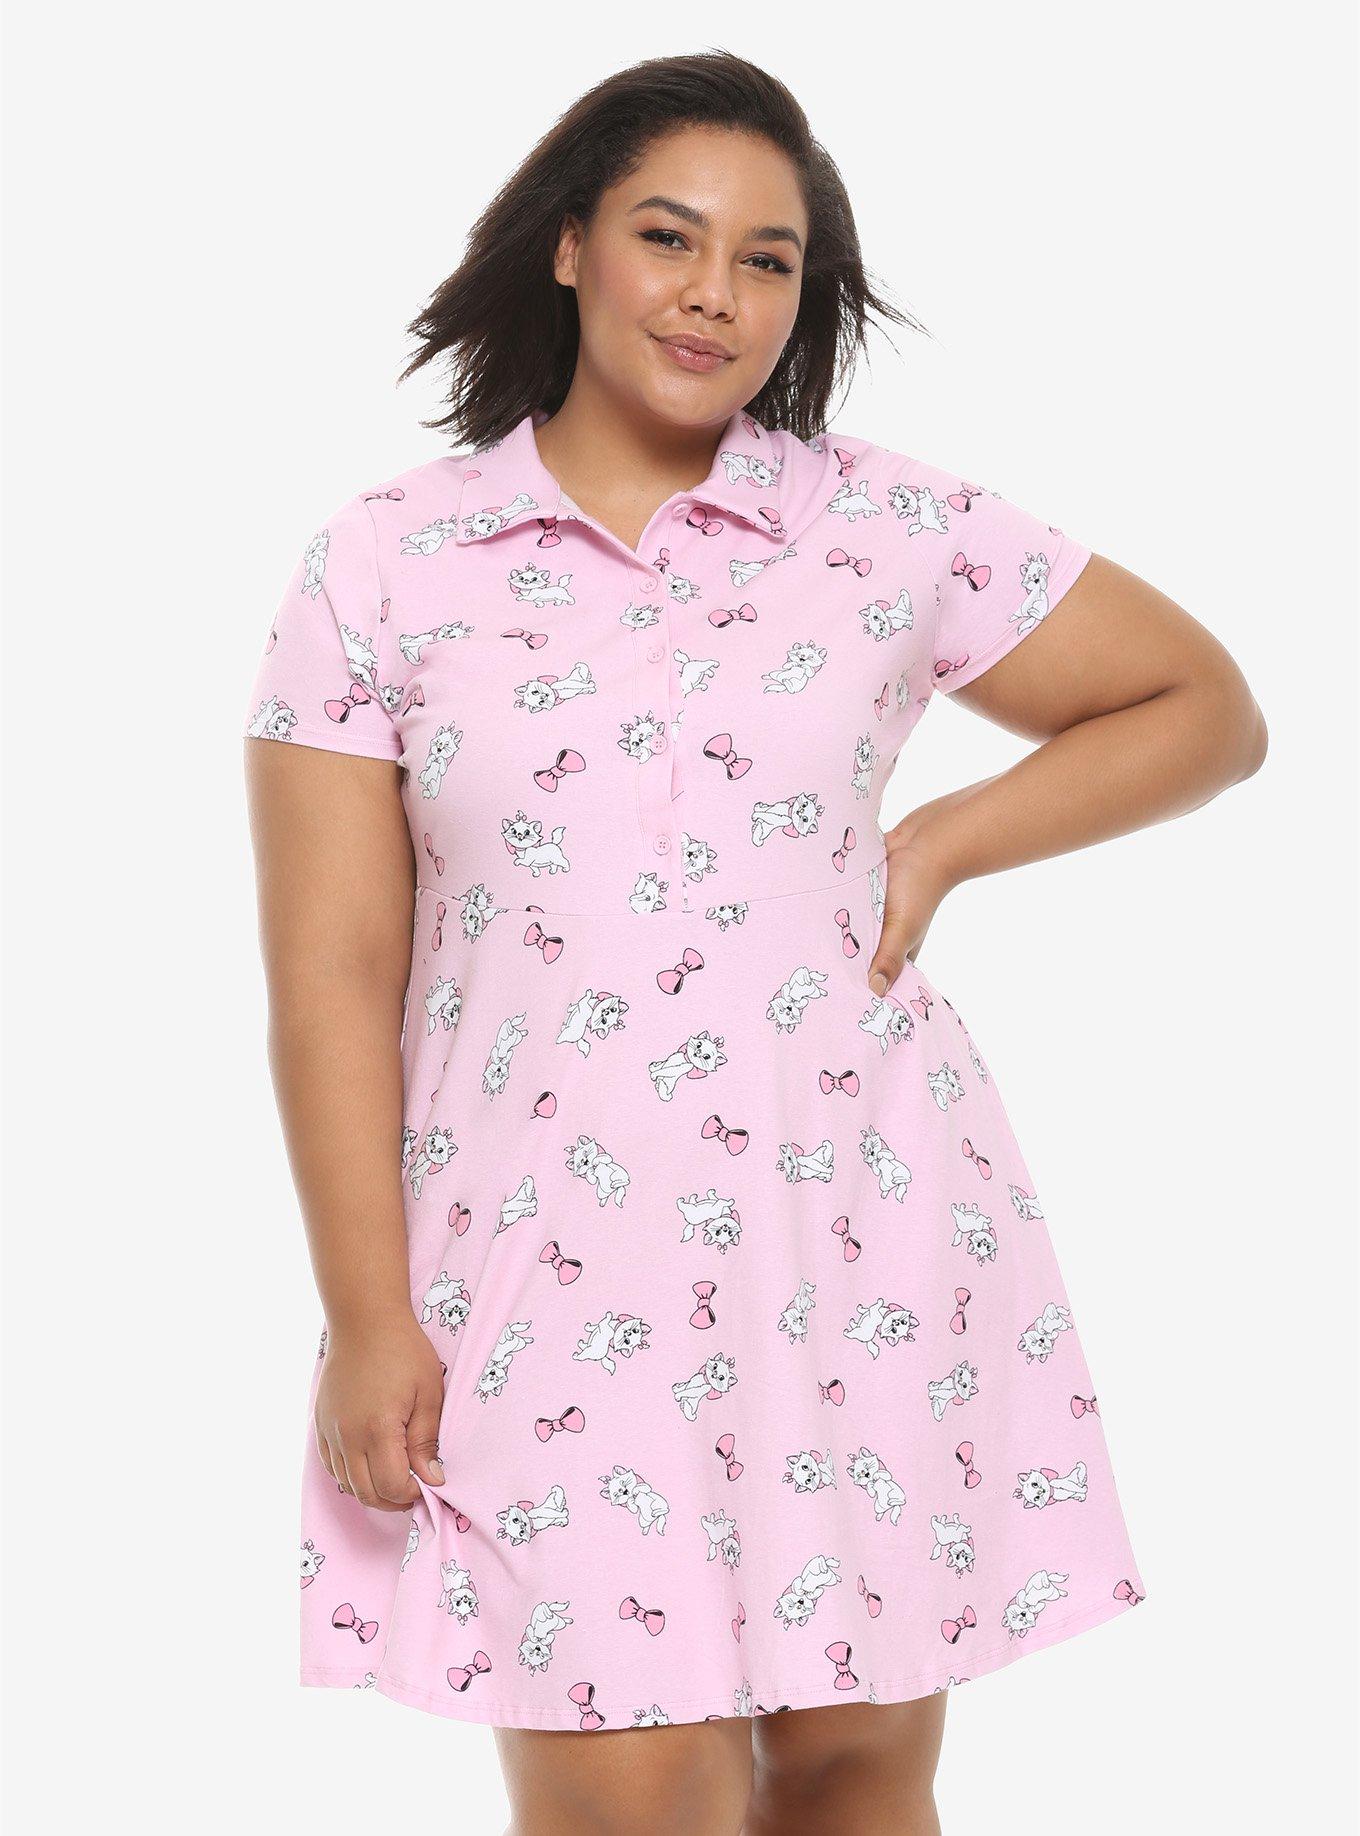 Disney The Aristocats Marie Collared Dress Plus Size, PINK, hi-res